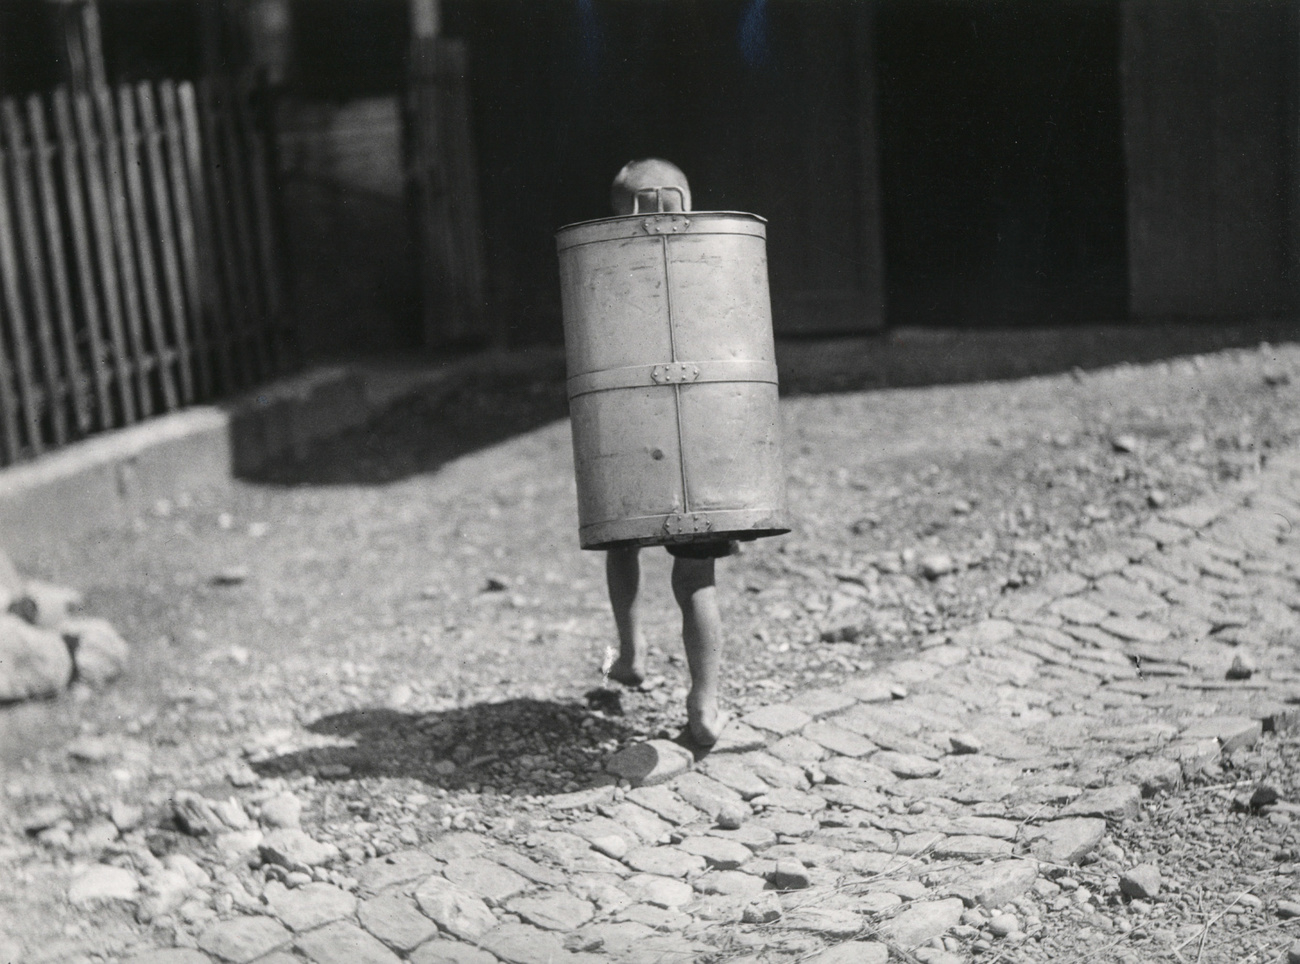 Child carrying milk container